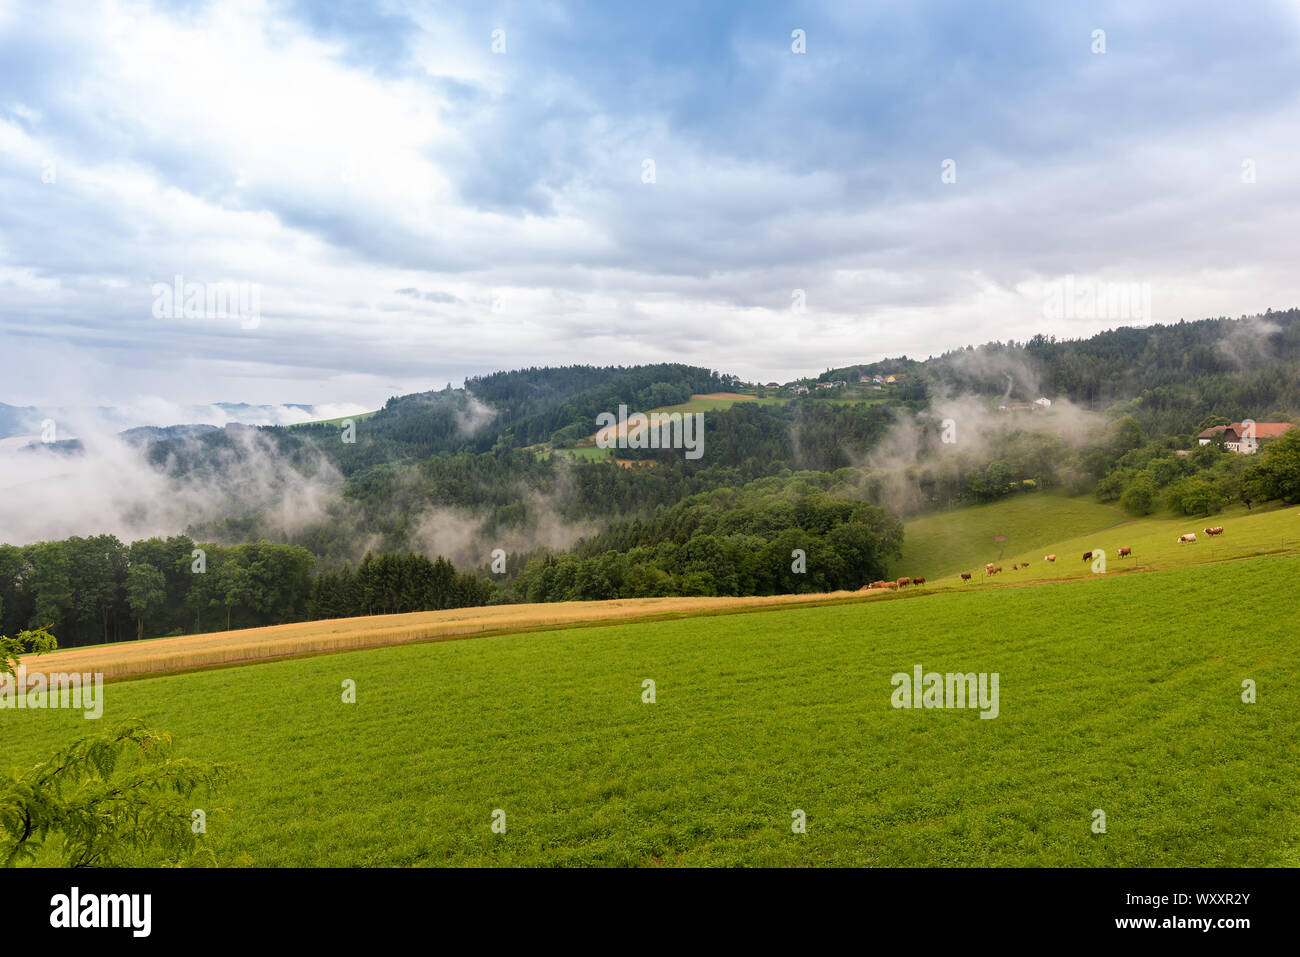 Color outdoor rural idyllic hilly summer landscape panorama with fields,meadows,cows,farm houses,forest under a blue sky with clouds and wafts of mist Stock Photo